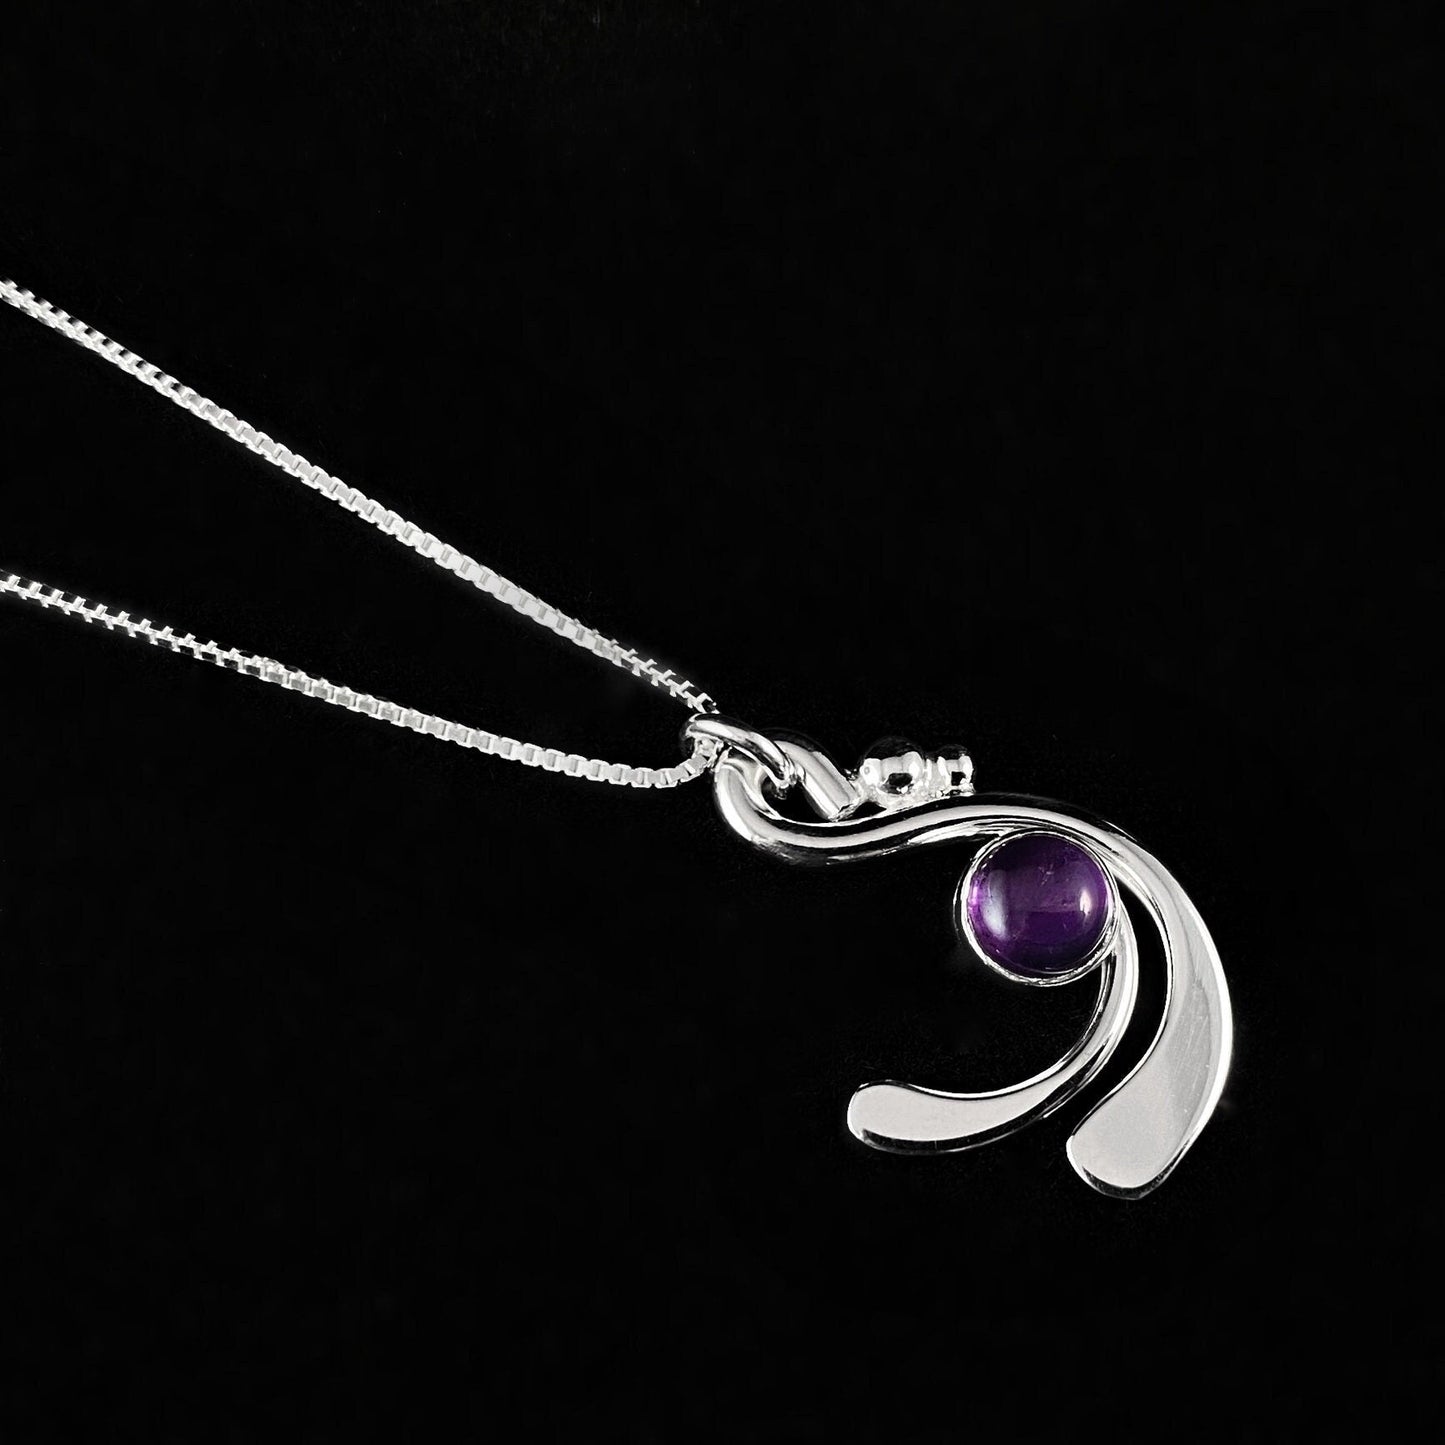 Handmade Sterling Silver Swaying Purple Stone Pendant Necklace, Made in USA - Reflections